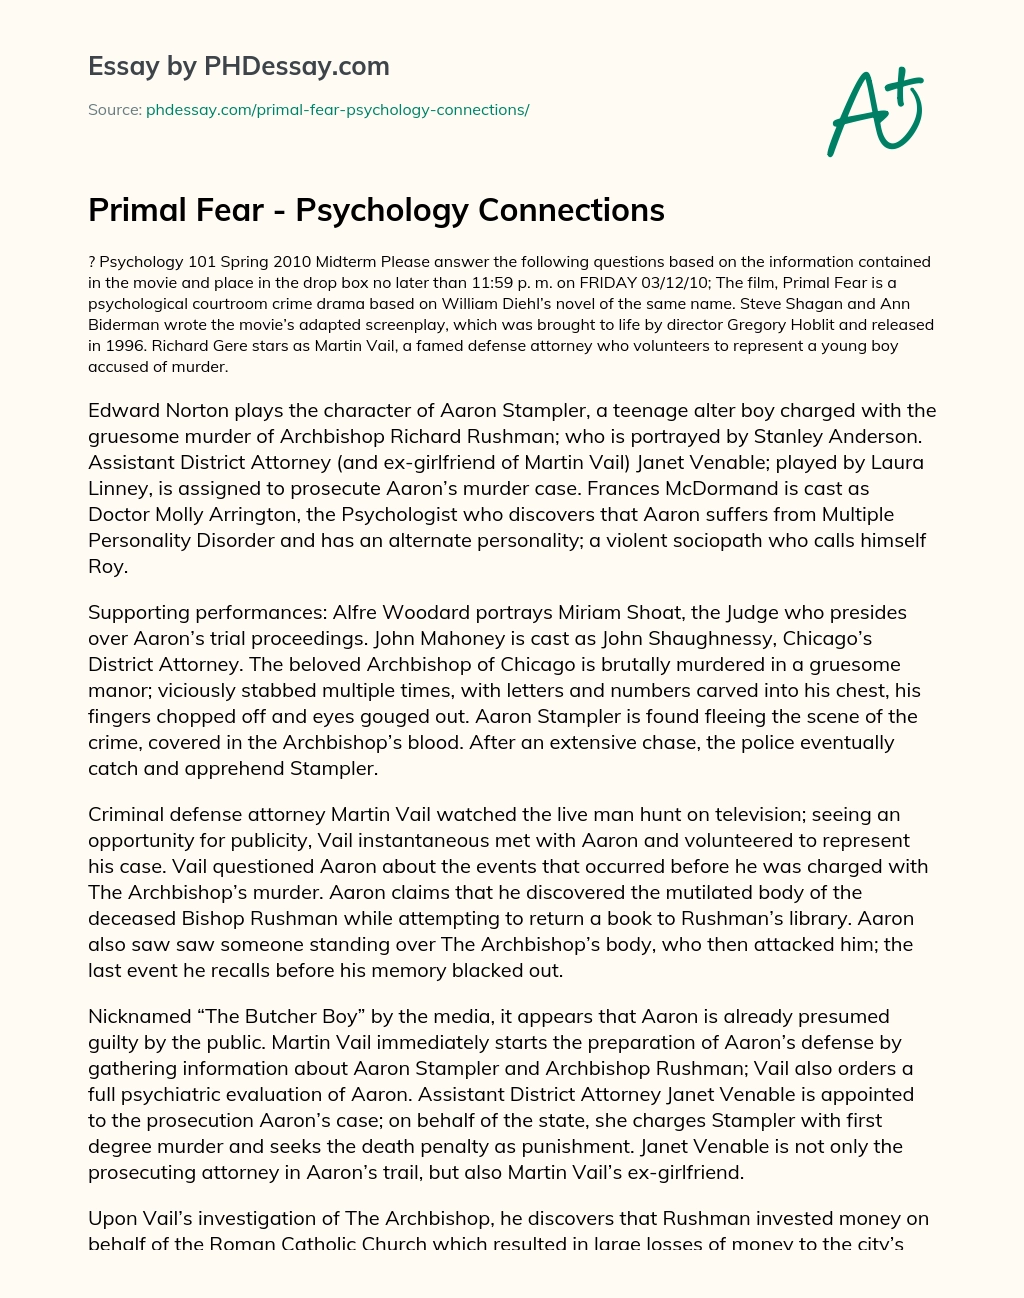 Primal Fear – Psychology Connections essay